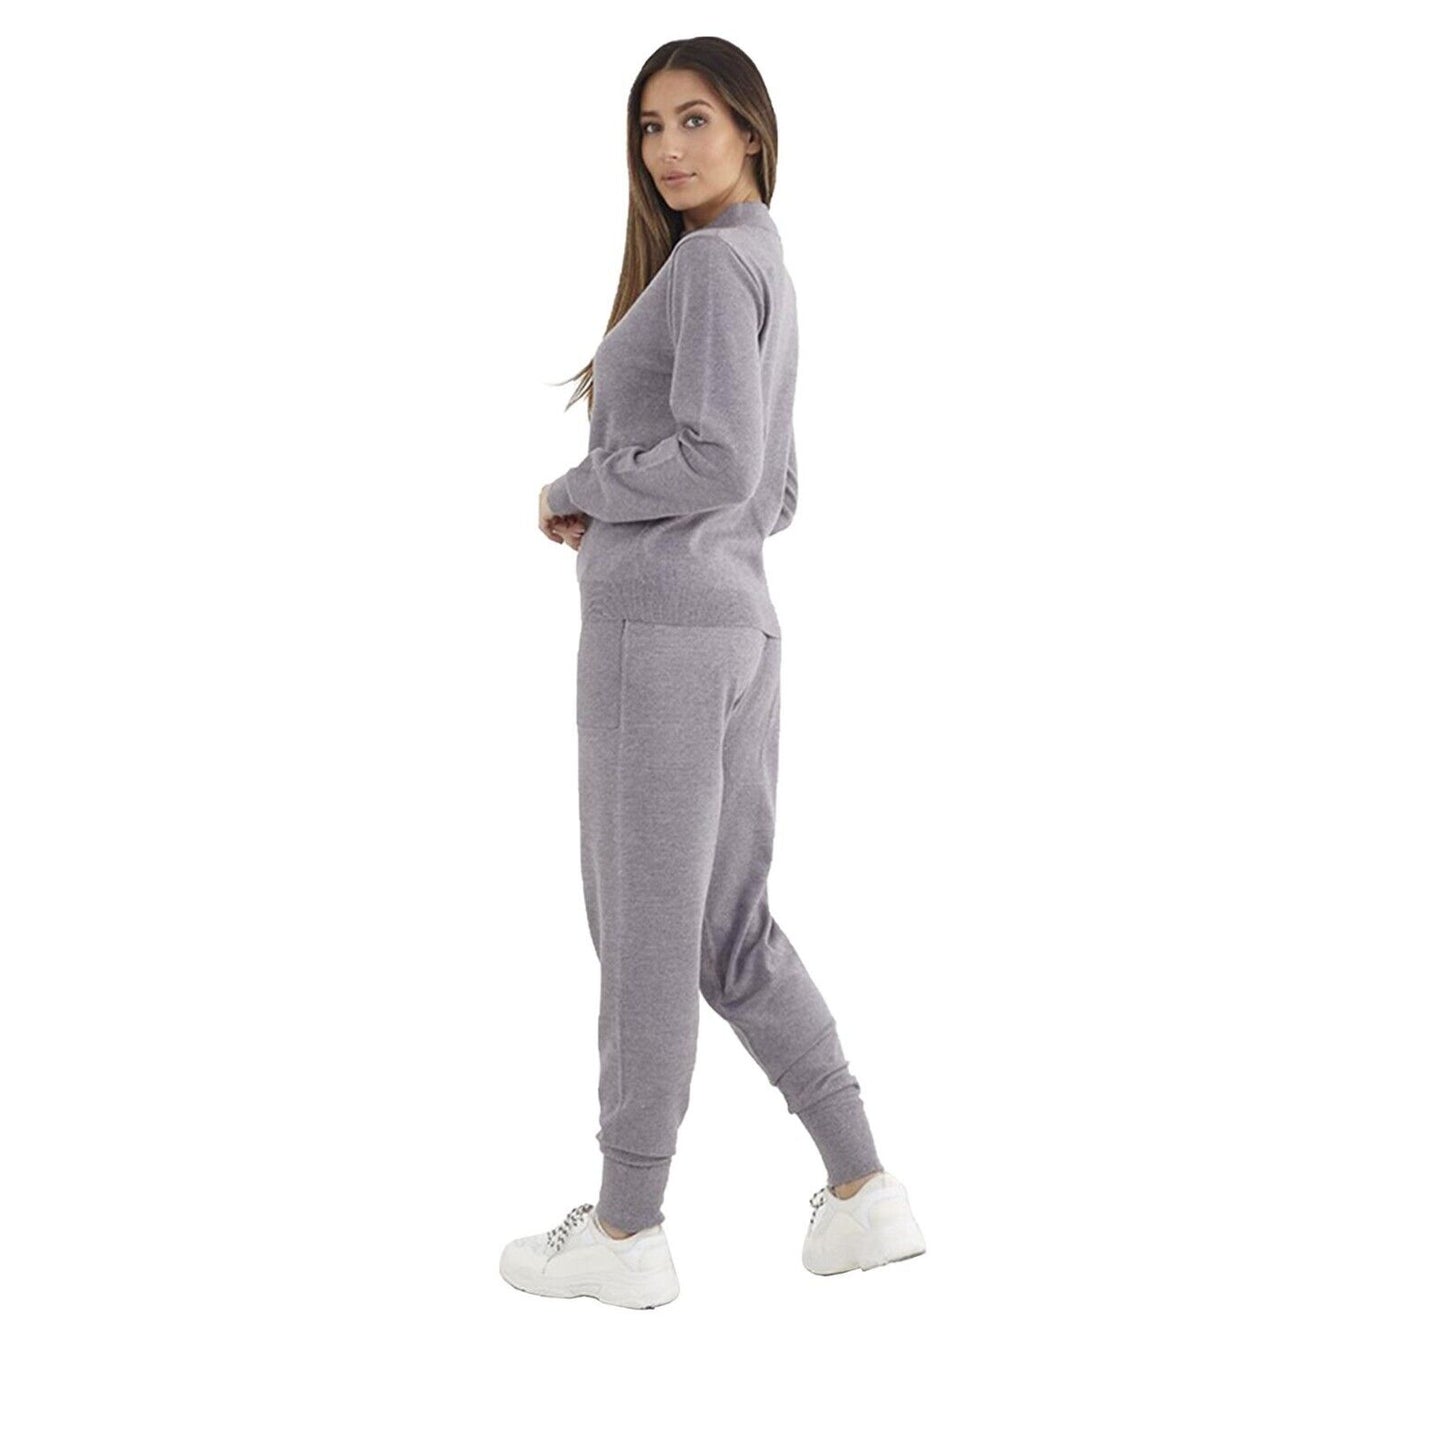 Womens Knitted 2 Piece Set Long Sleeve High Neck Top & Trouser Tracksuit XS-L